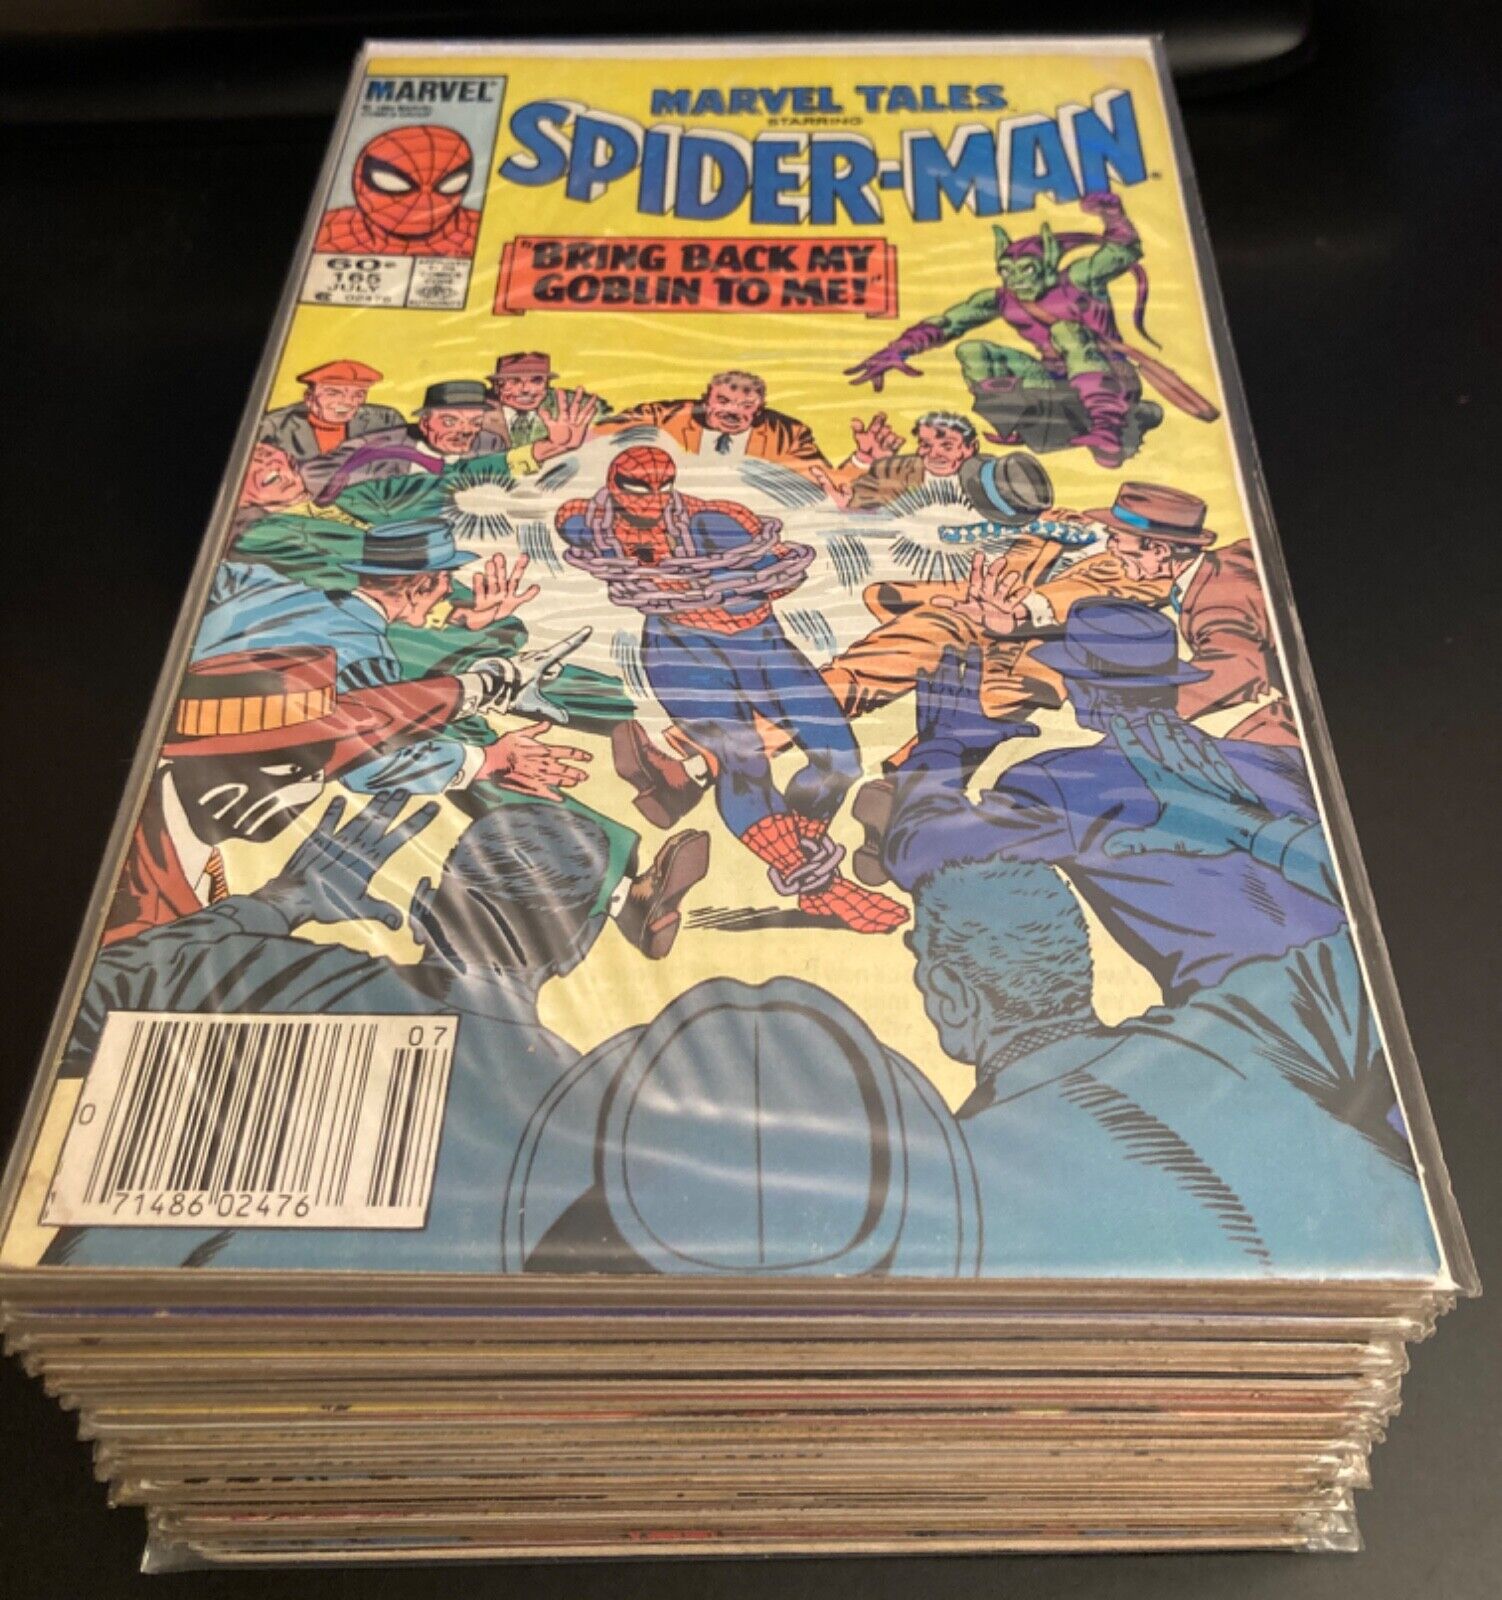 Wow BIG Lot of *32* MARVEL TALES—Vintage SPIDER-MAN Stories from the 60s & 70s